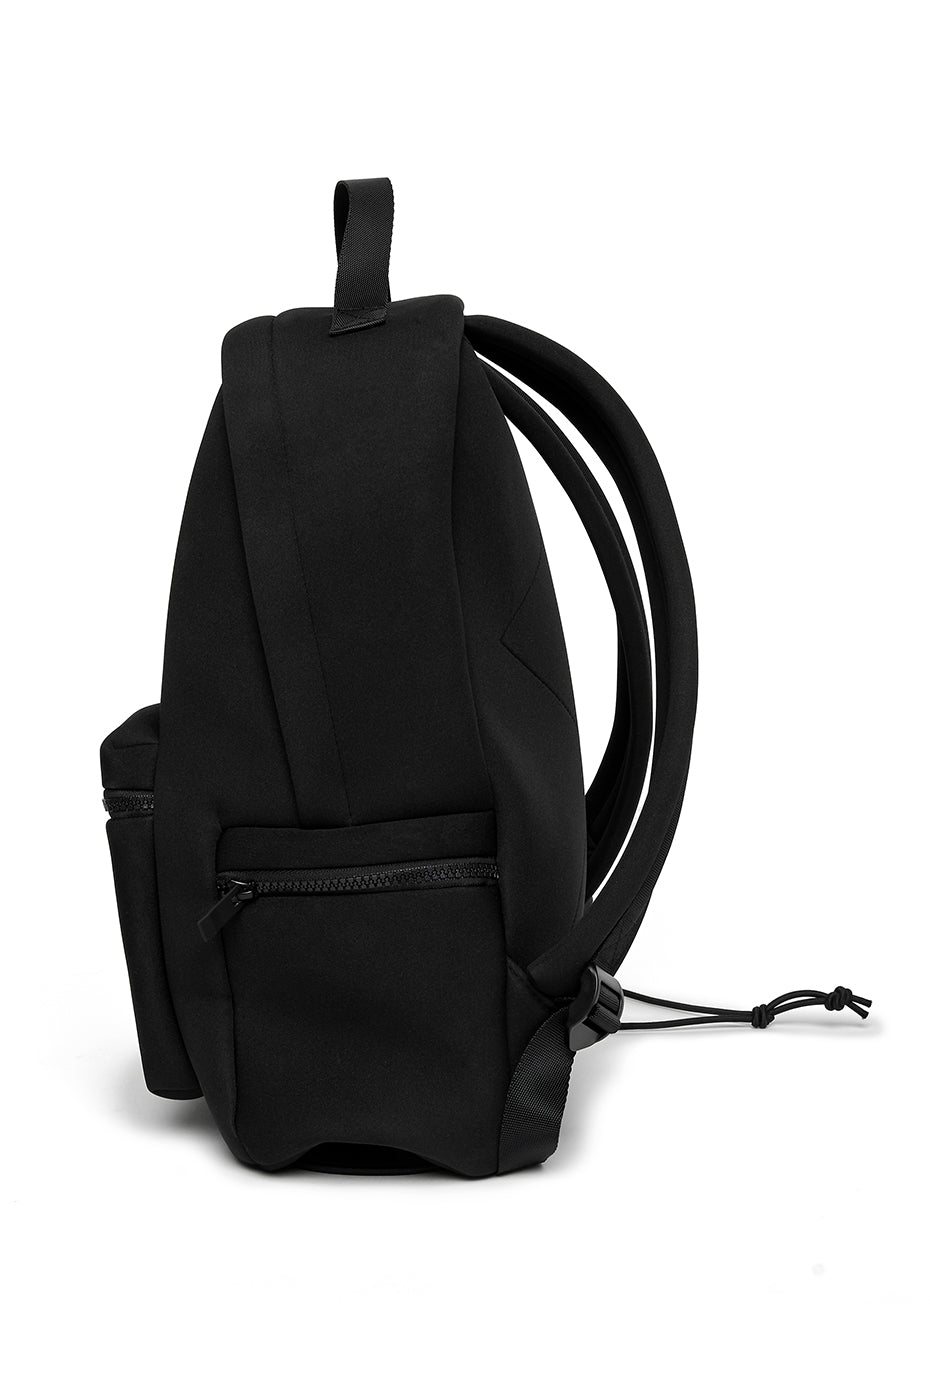 alo stow backpack